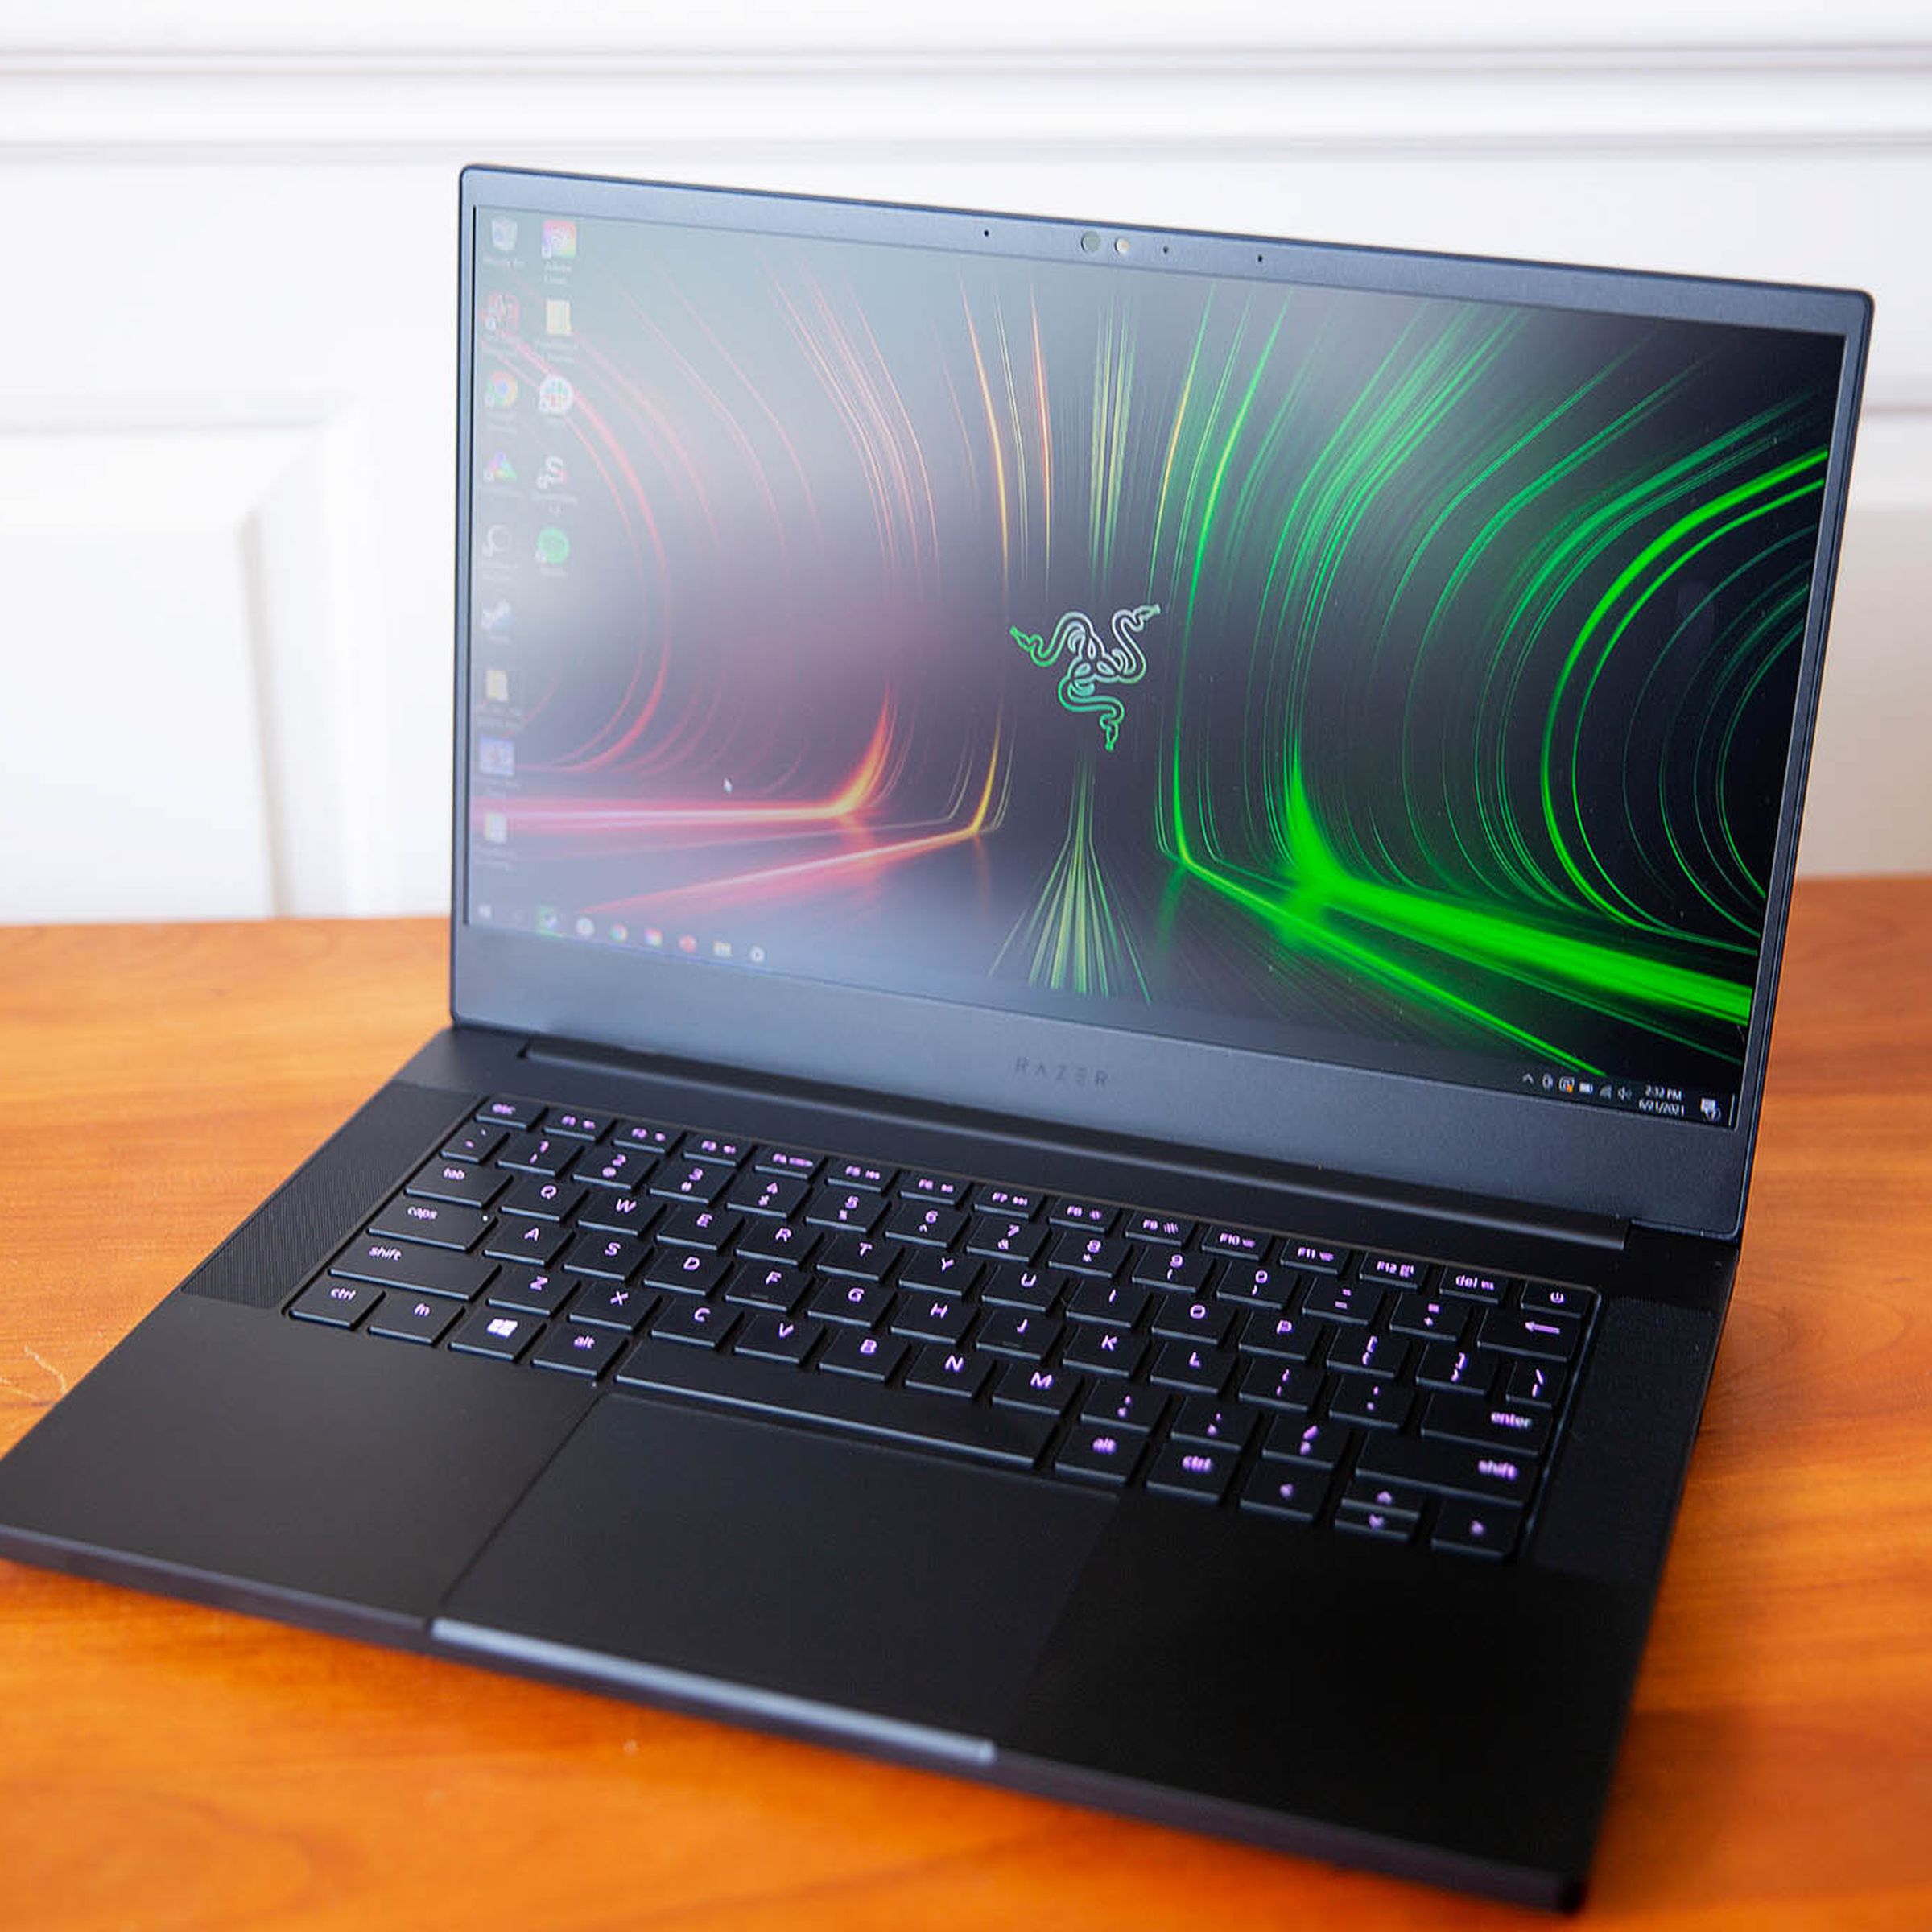 The Razer Blade 14 seen from above, open, angled to the left. The screen displays the Razer logo on a red and green background. The keys are lit a dark pink.